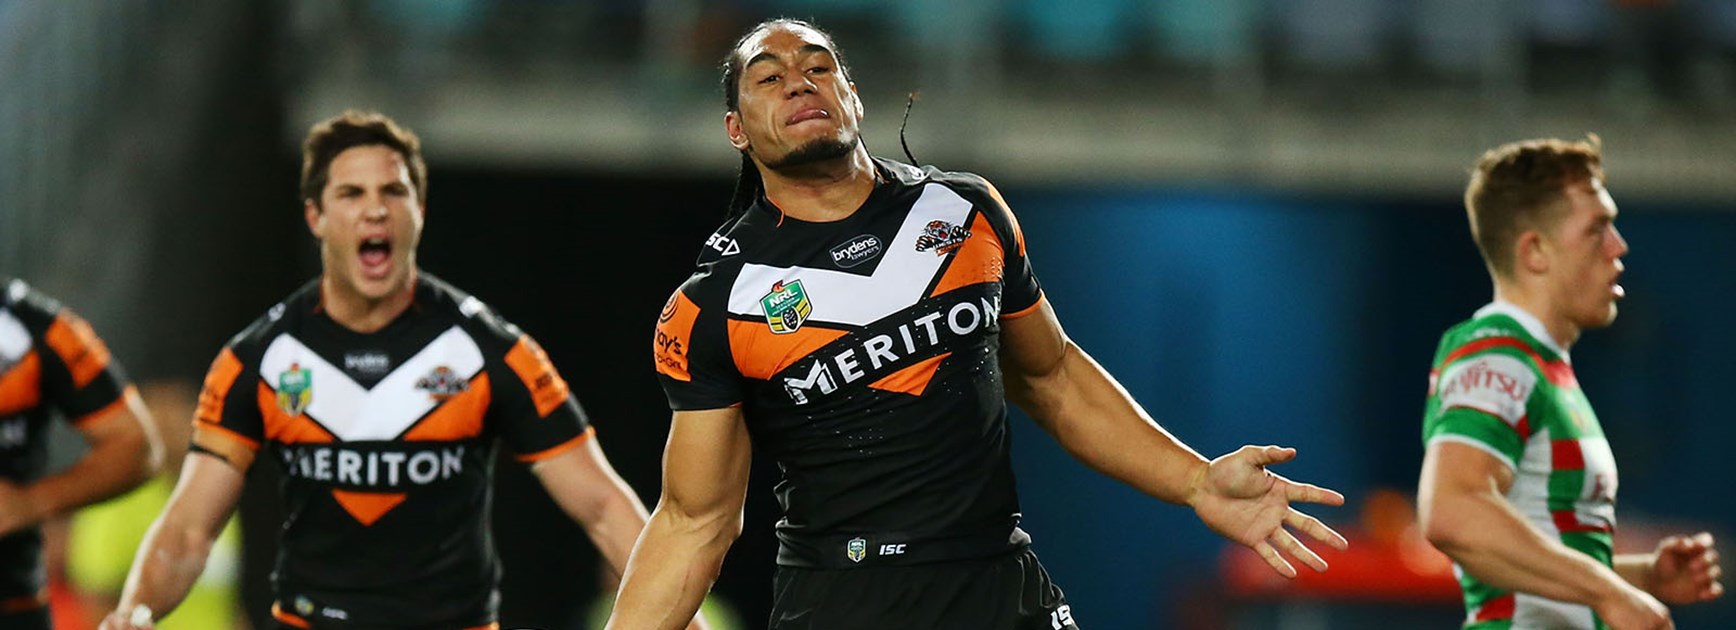 Martin Taupau scored two tries in a dominant display against the Rabbitohs at ANZ Stadium.